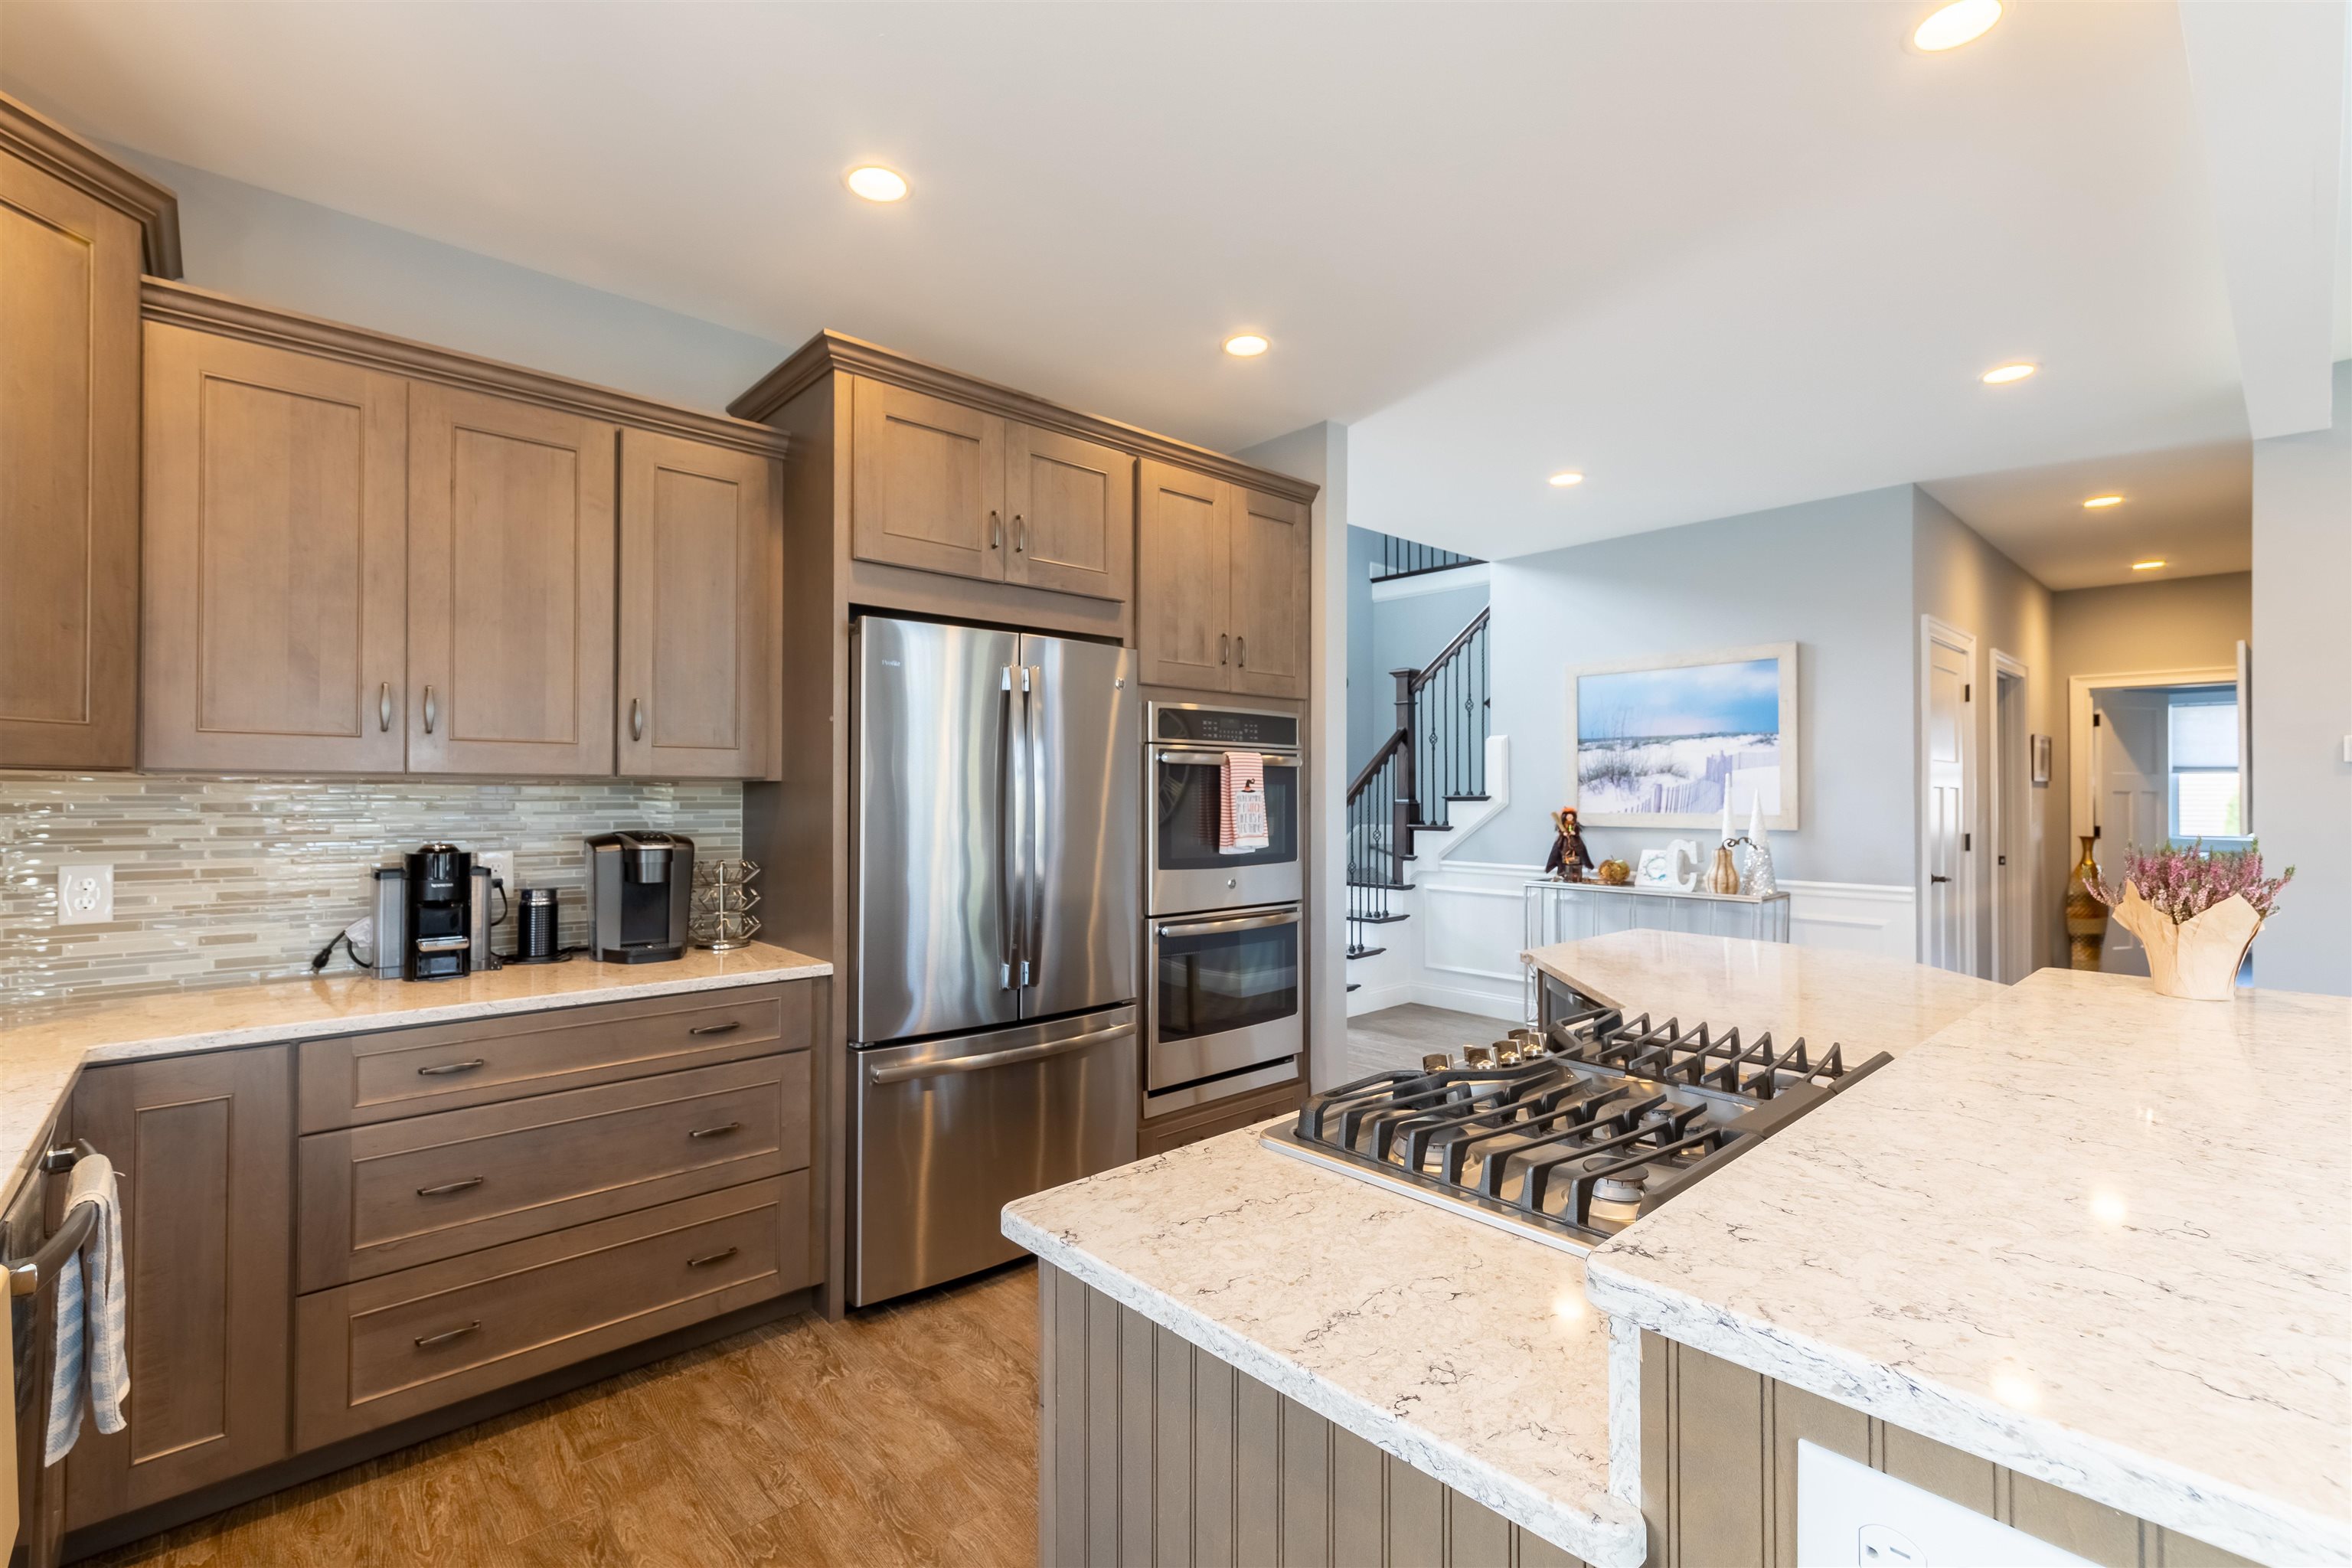 Kitchen island is set perfectly with modern design lighting, wine rack or possible shelving , beverage cooler and room for extra seating. Soft close cabinetry and GE stainless steel appliances